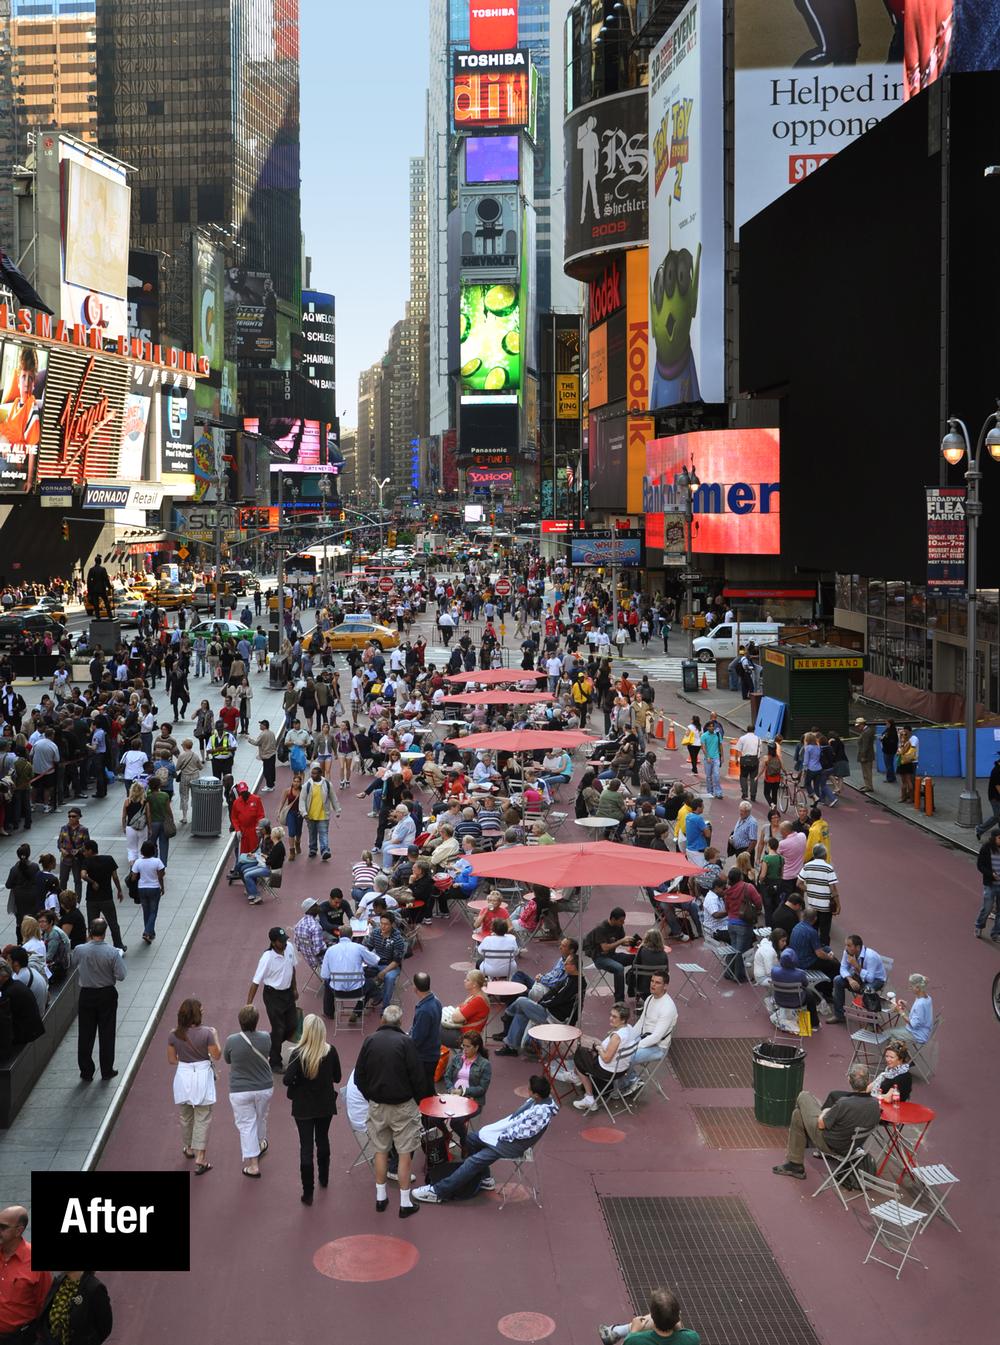 Times Square in New York City has been pedestrianised and now attracts café seating, concerts and even yoga classes